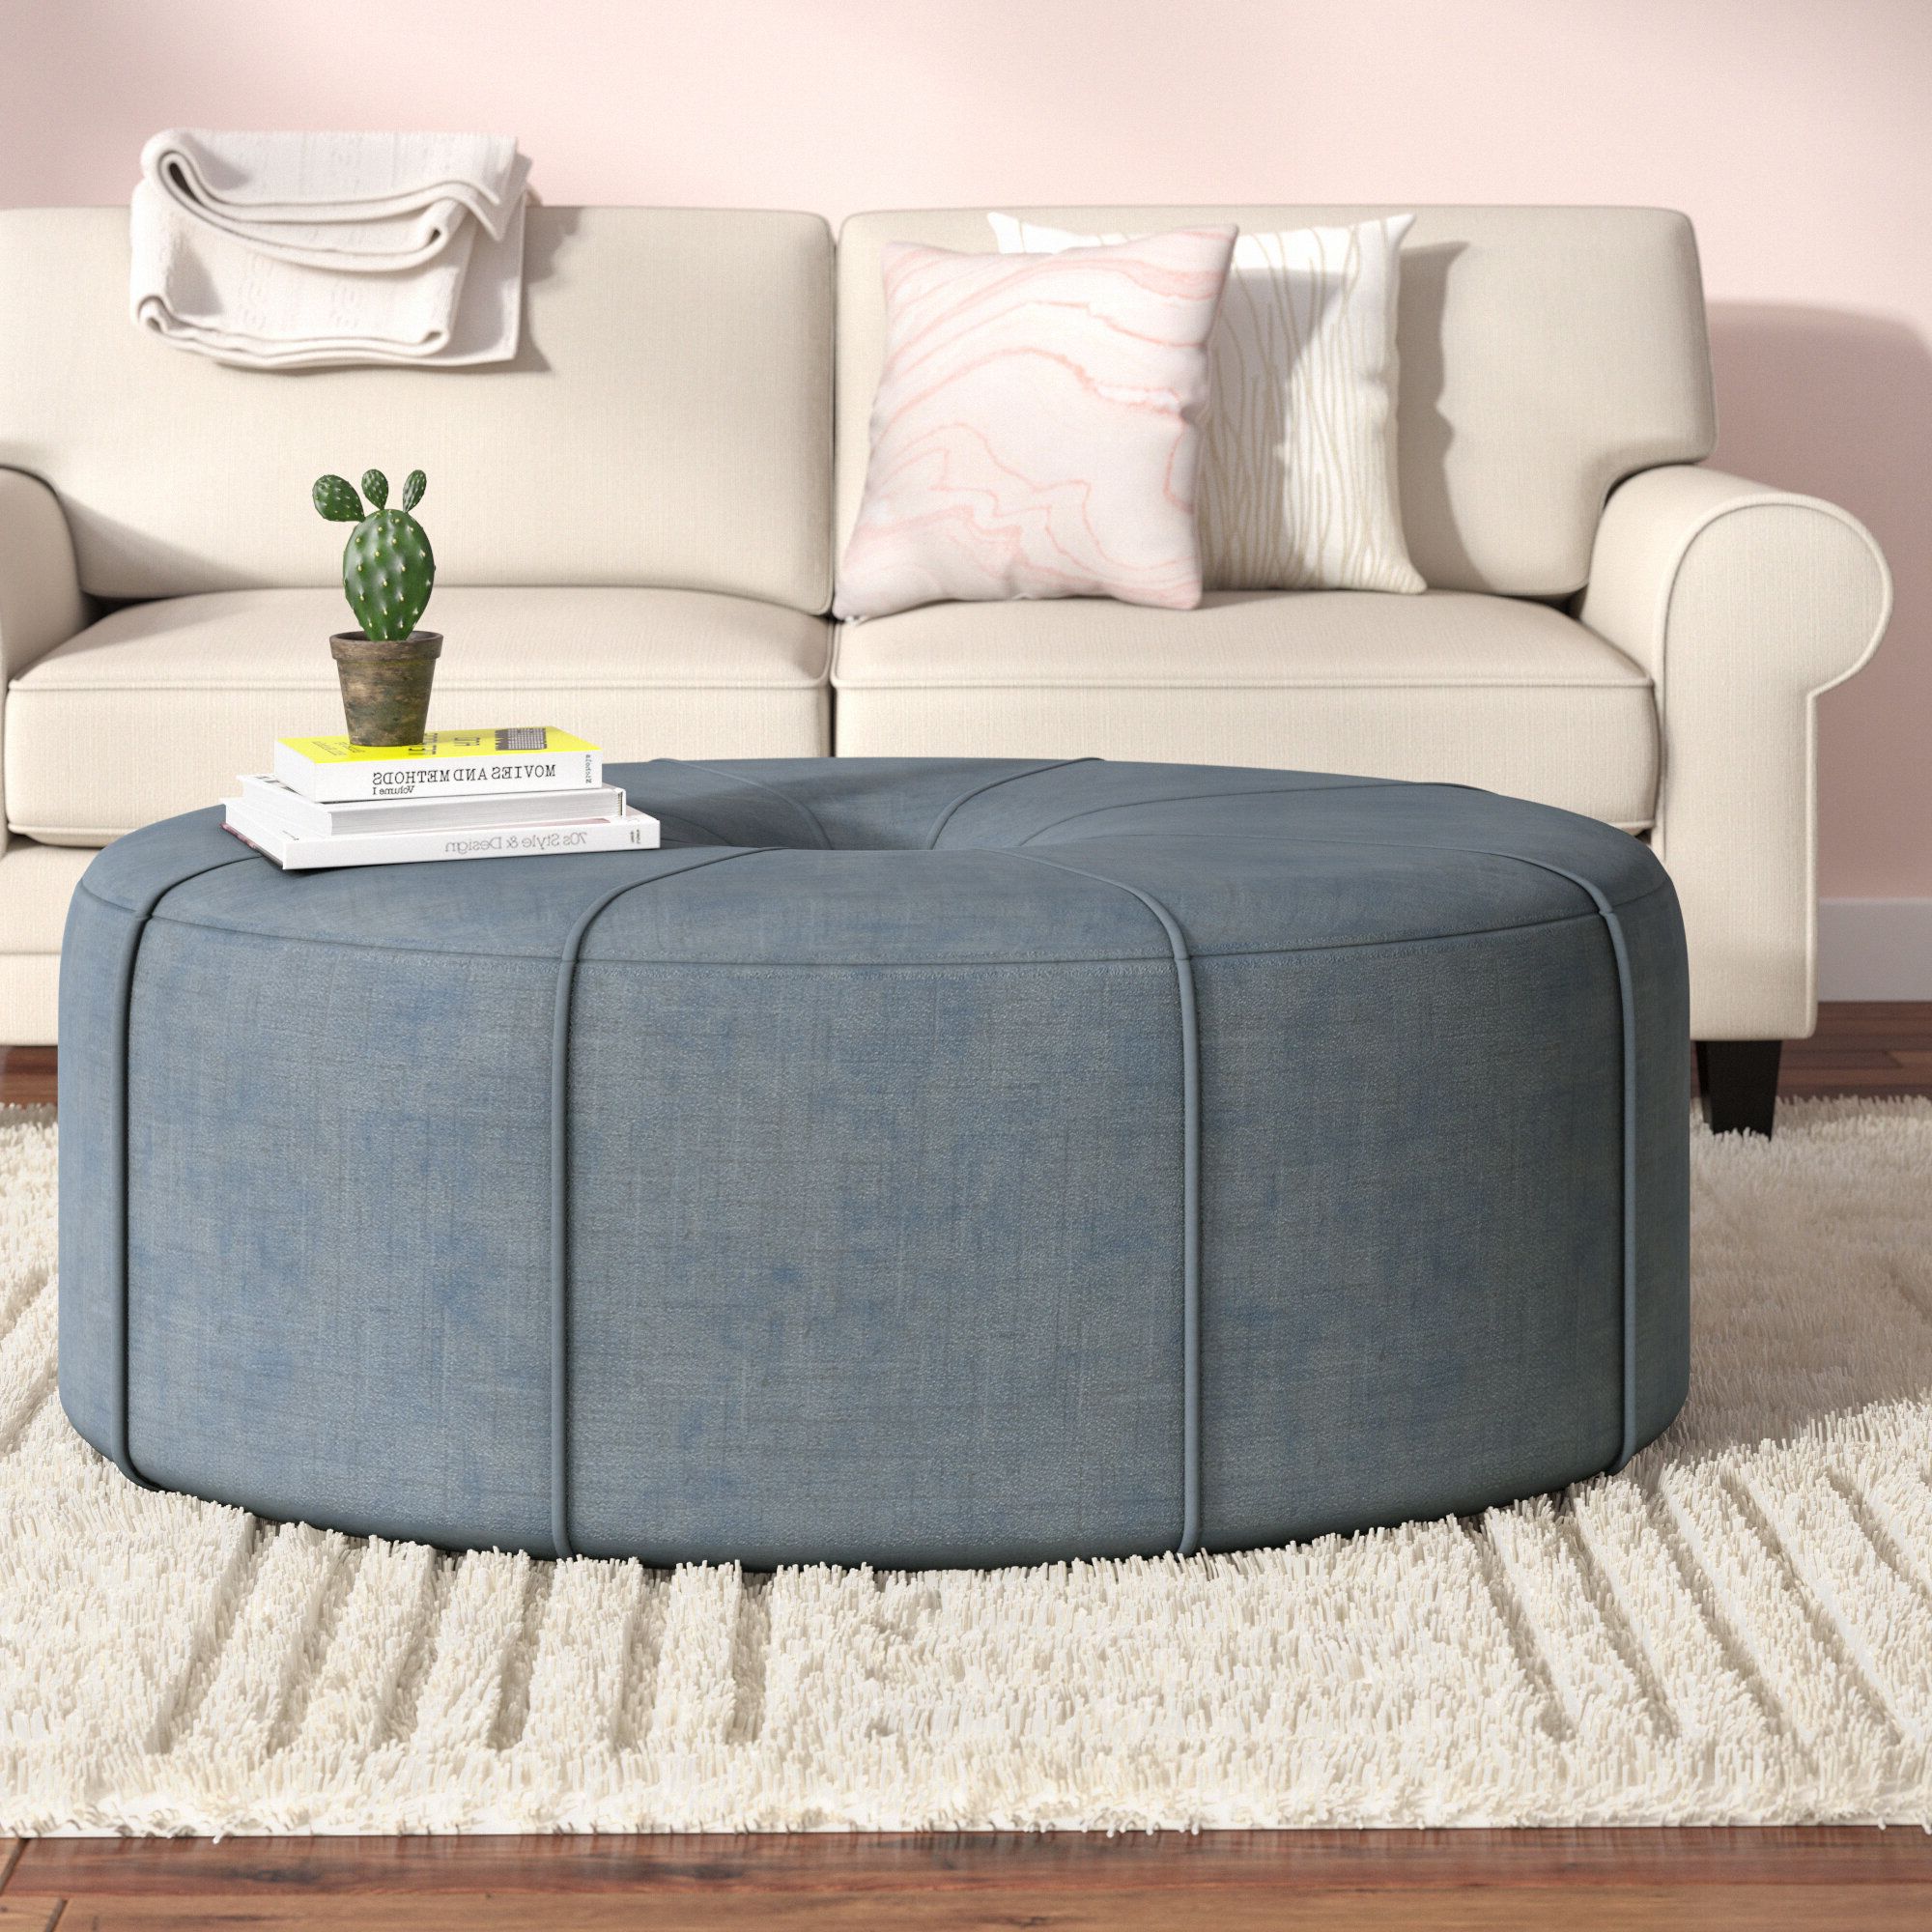 Well Known Gray Fabric Oval Ottomans In Oval Tufted Ottoman Coffee Table : Round Grey Fabric Tufted Coffee (View 5 of 10)